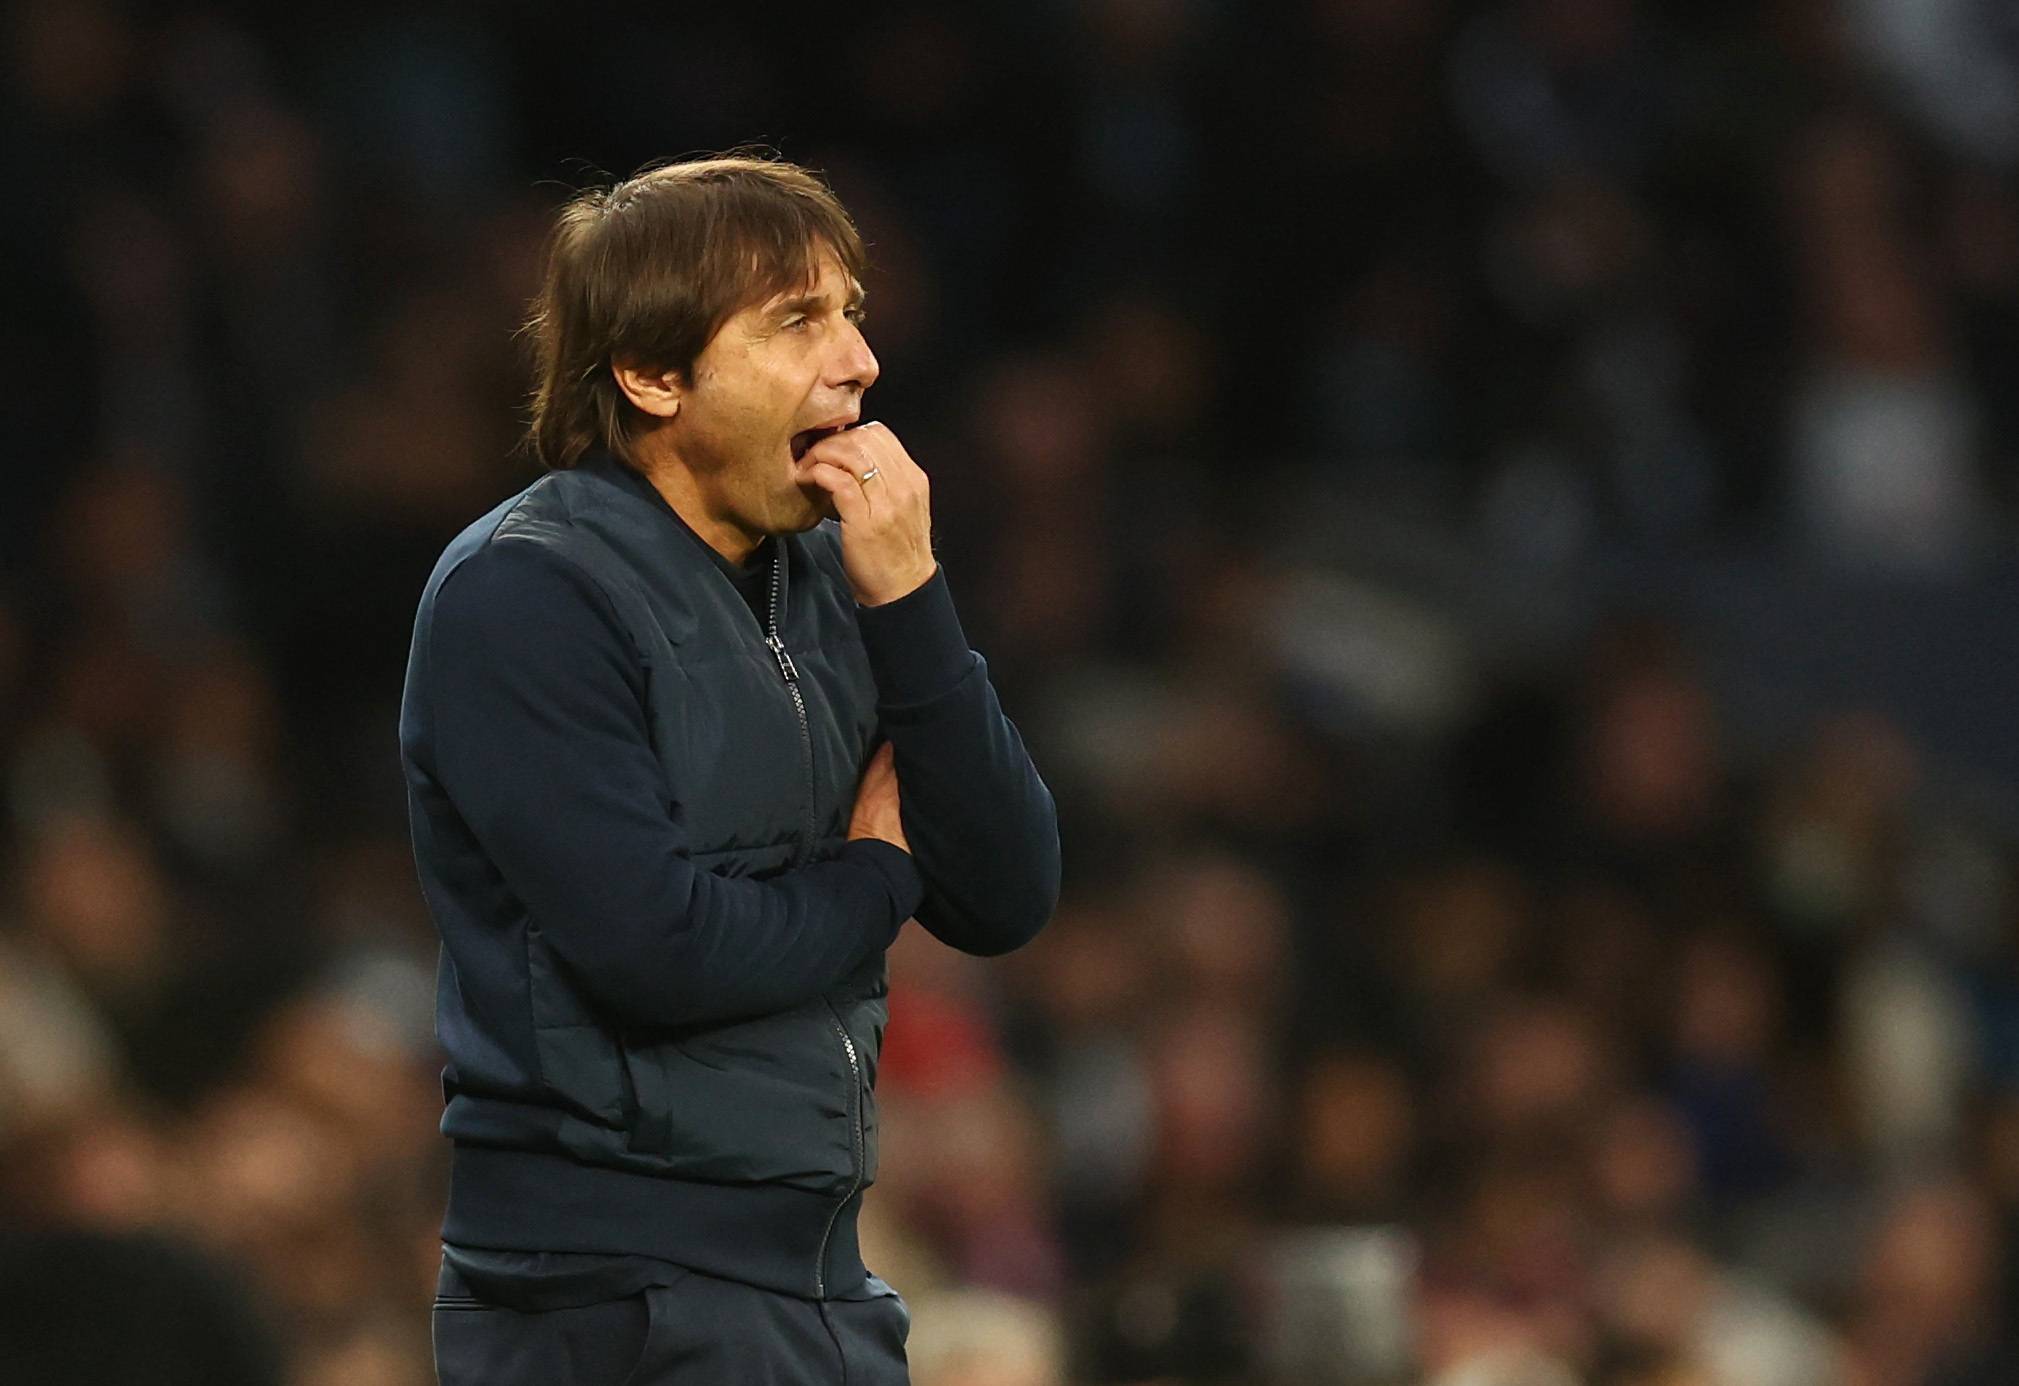 Tottenham Hotspur: BBC pundit claims Conte wasn't as animated as usual during defeat - Podcasts